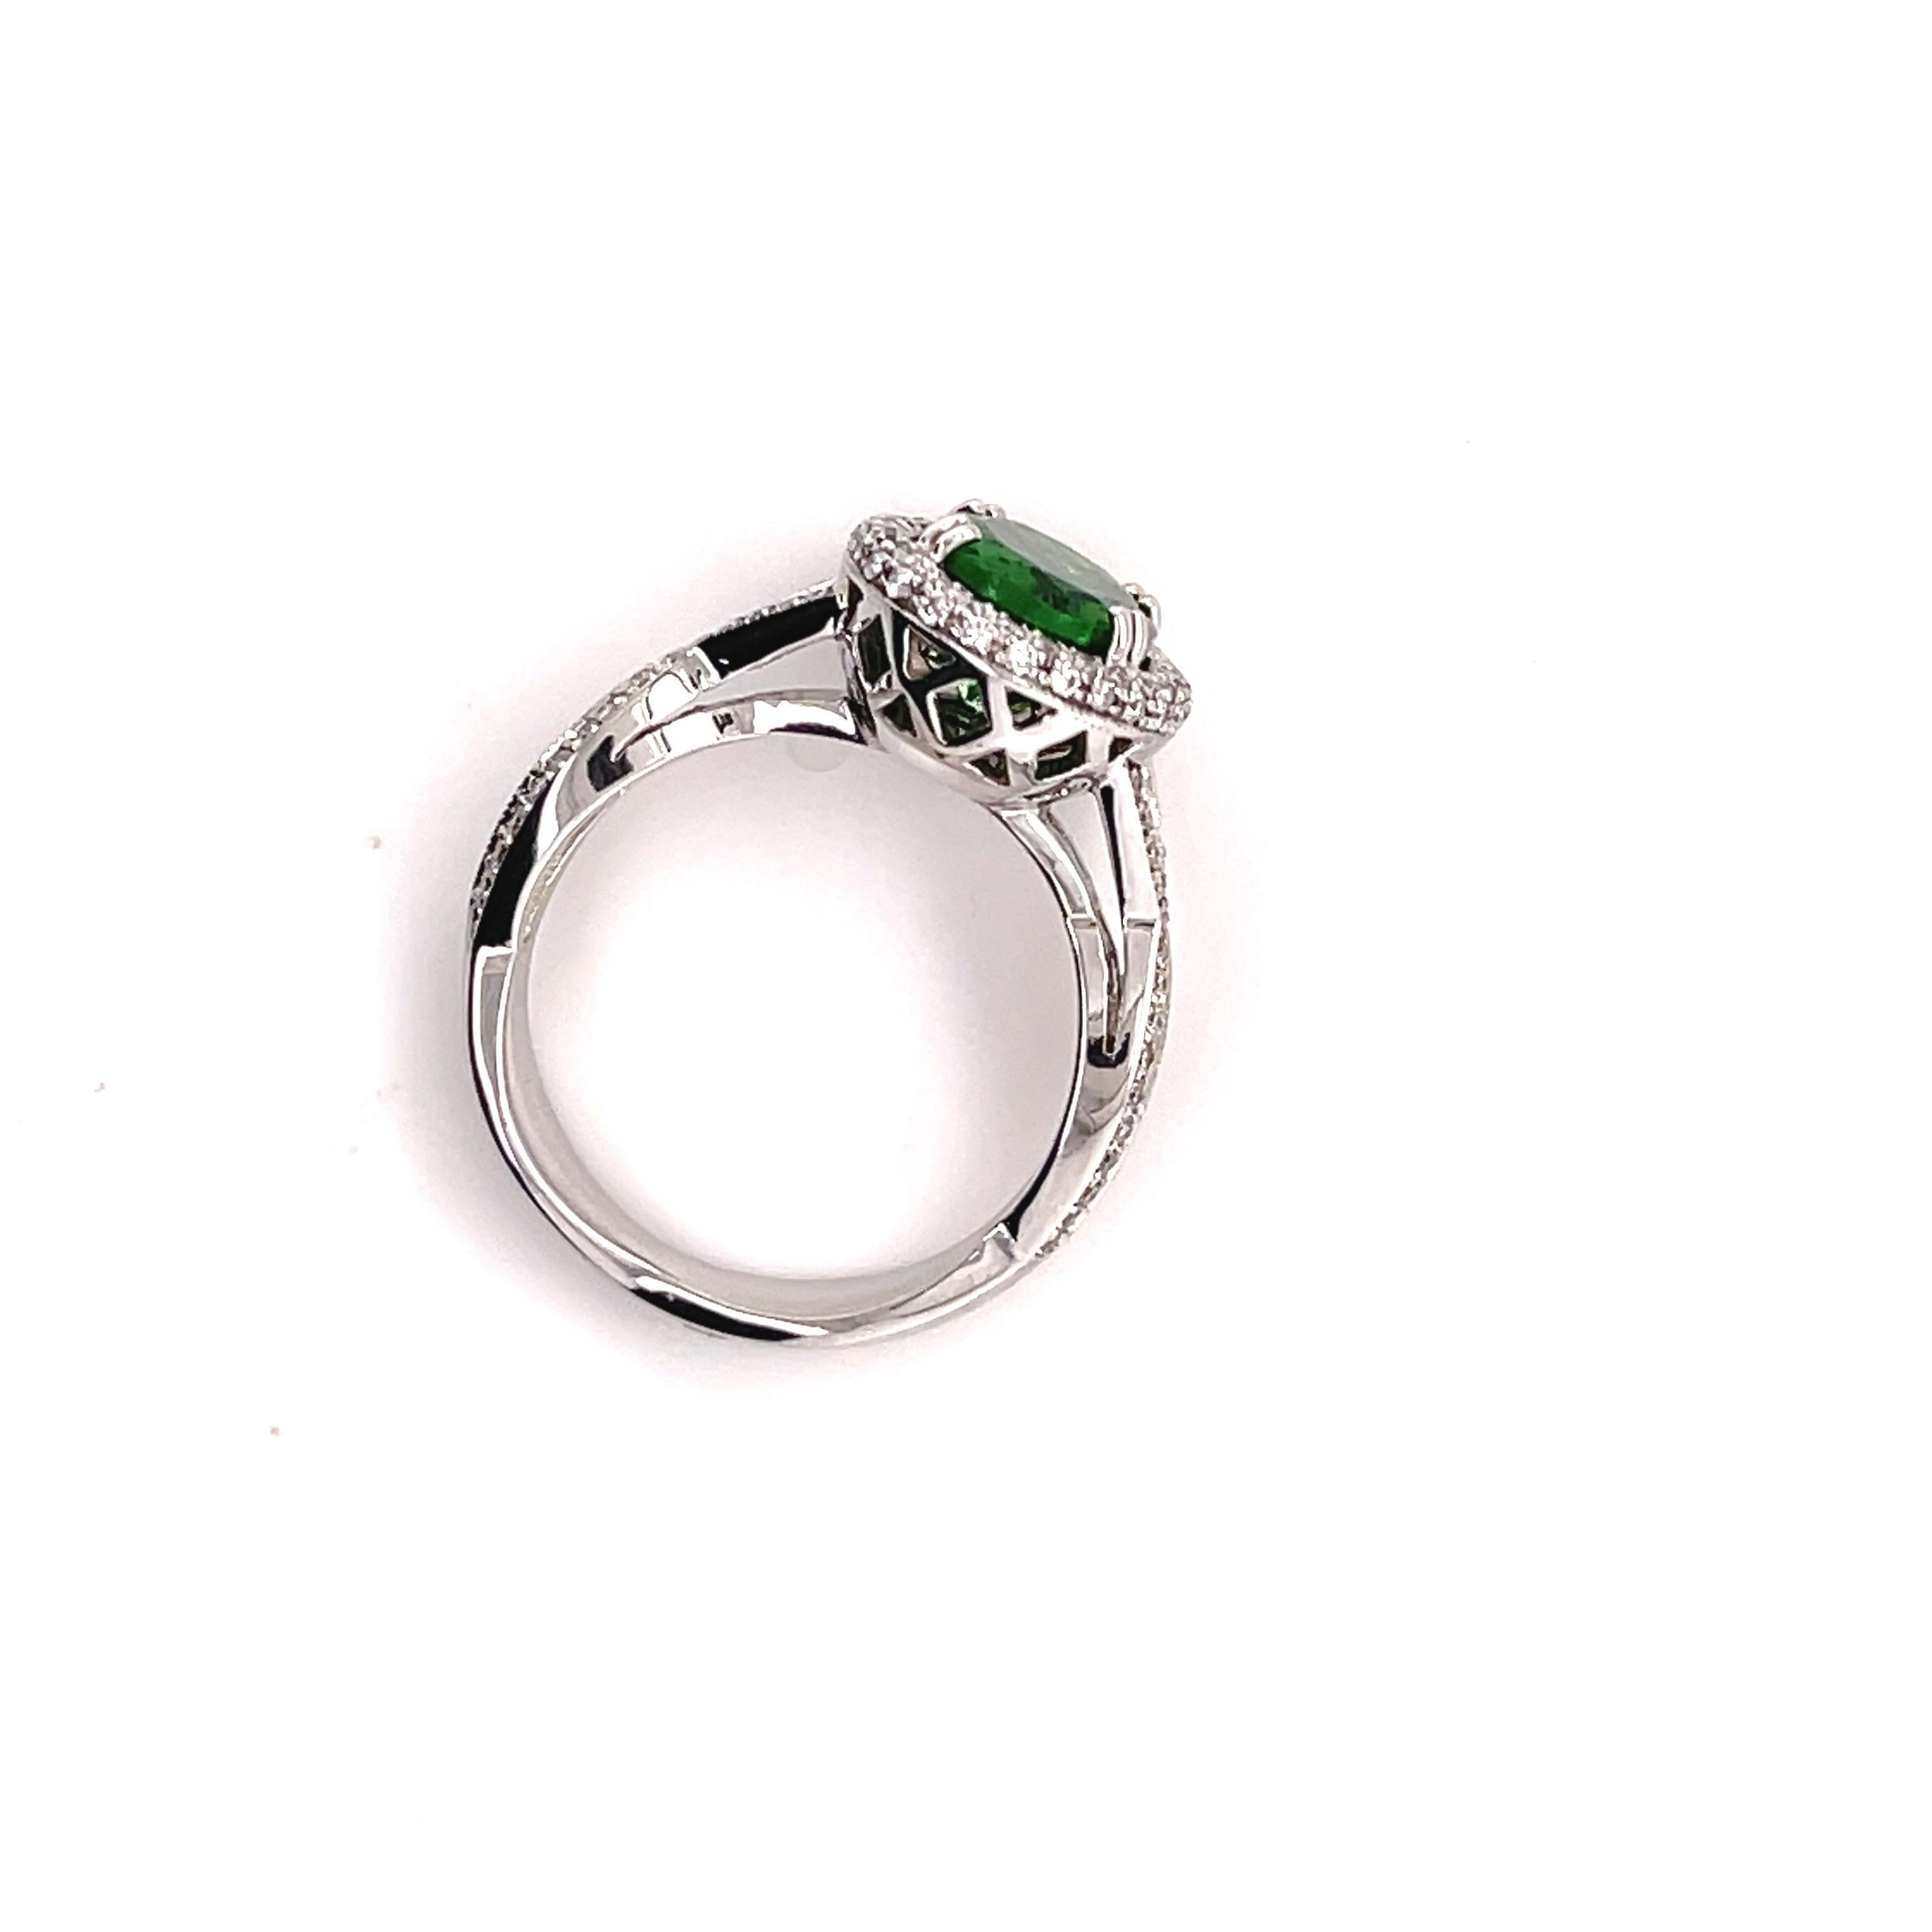 Green Garnets (Tsavorites) clean and in lager size have become harder to get. This oval cut Tsavorite is 2.02 carats, it is VS grade and cut by Bill Vance.  We decided to make the ring in 14-karat white gold and accent it with small  Diamonds,  112